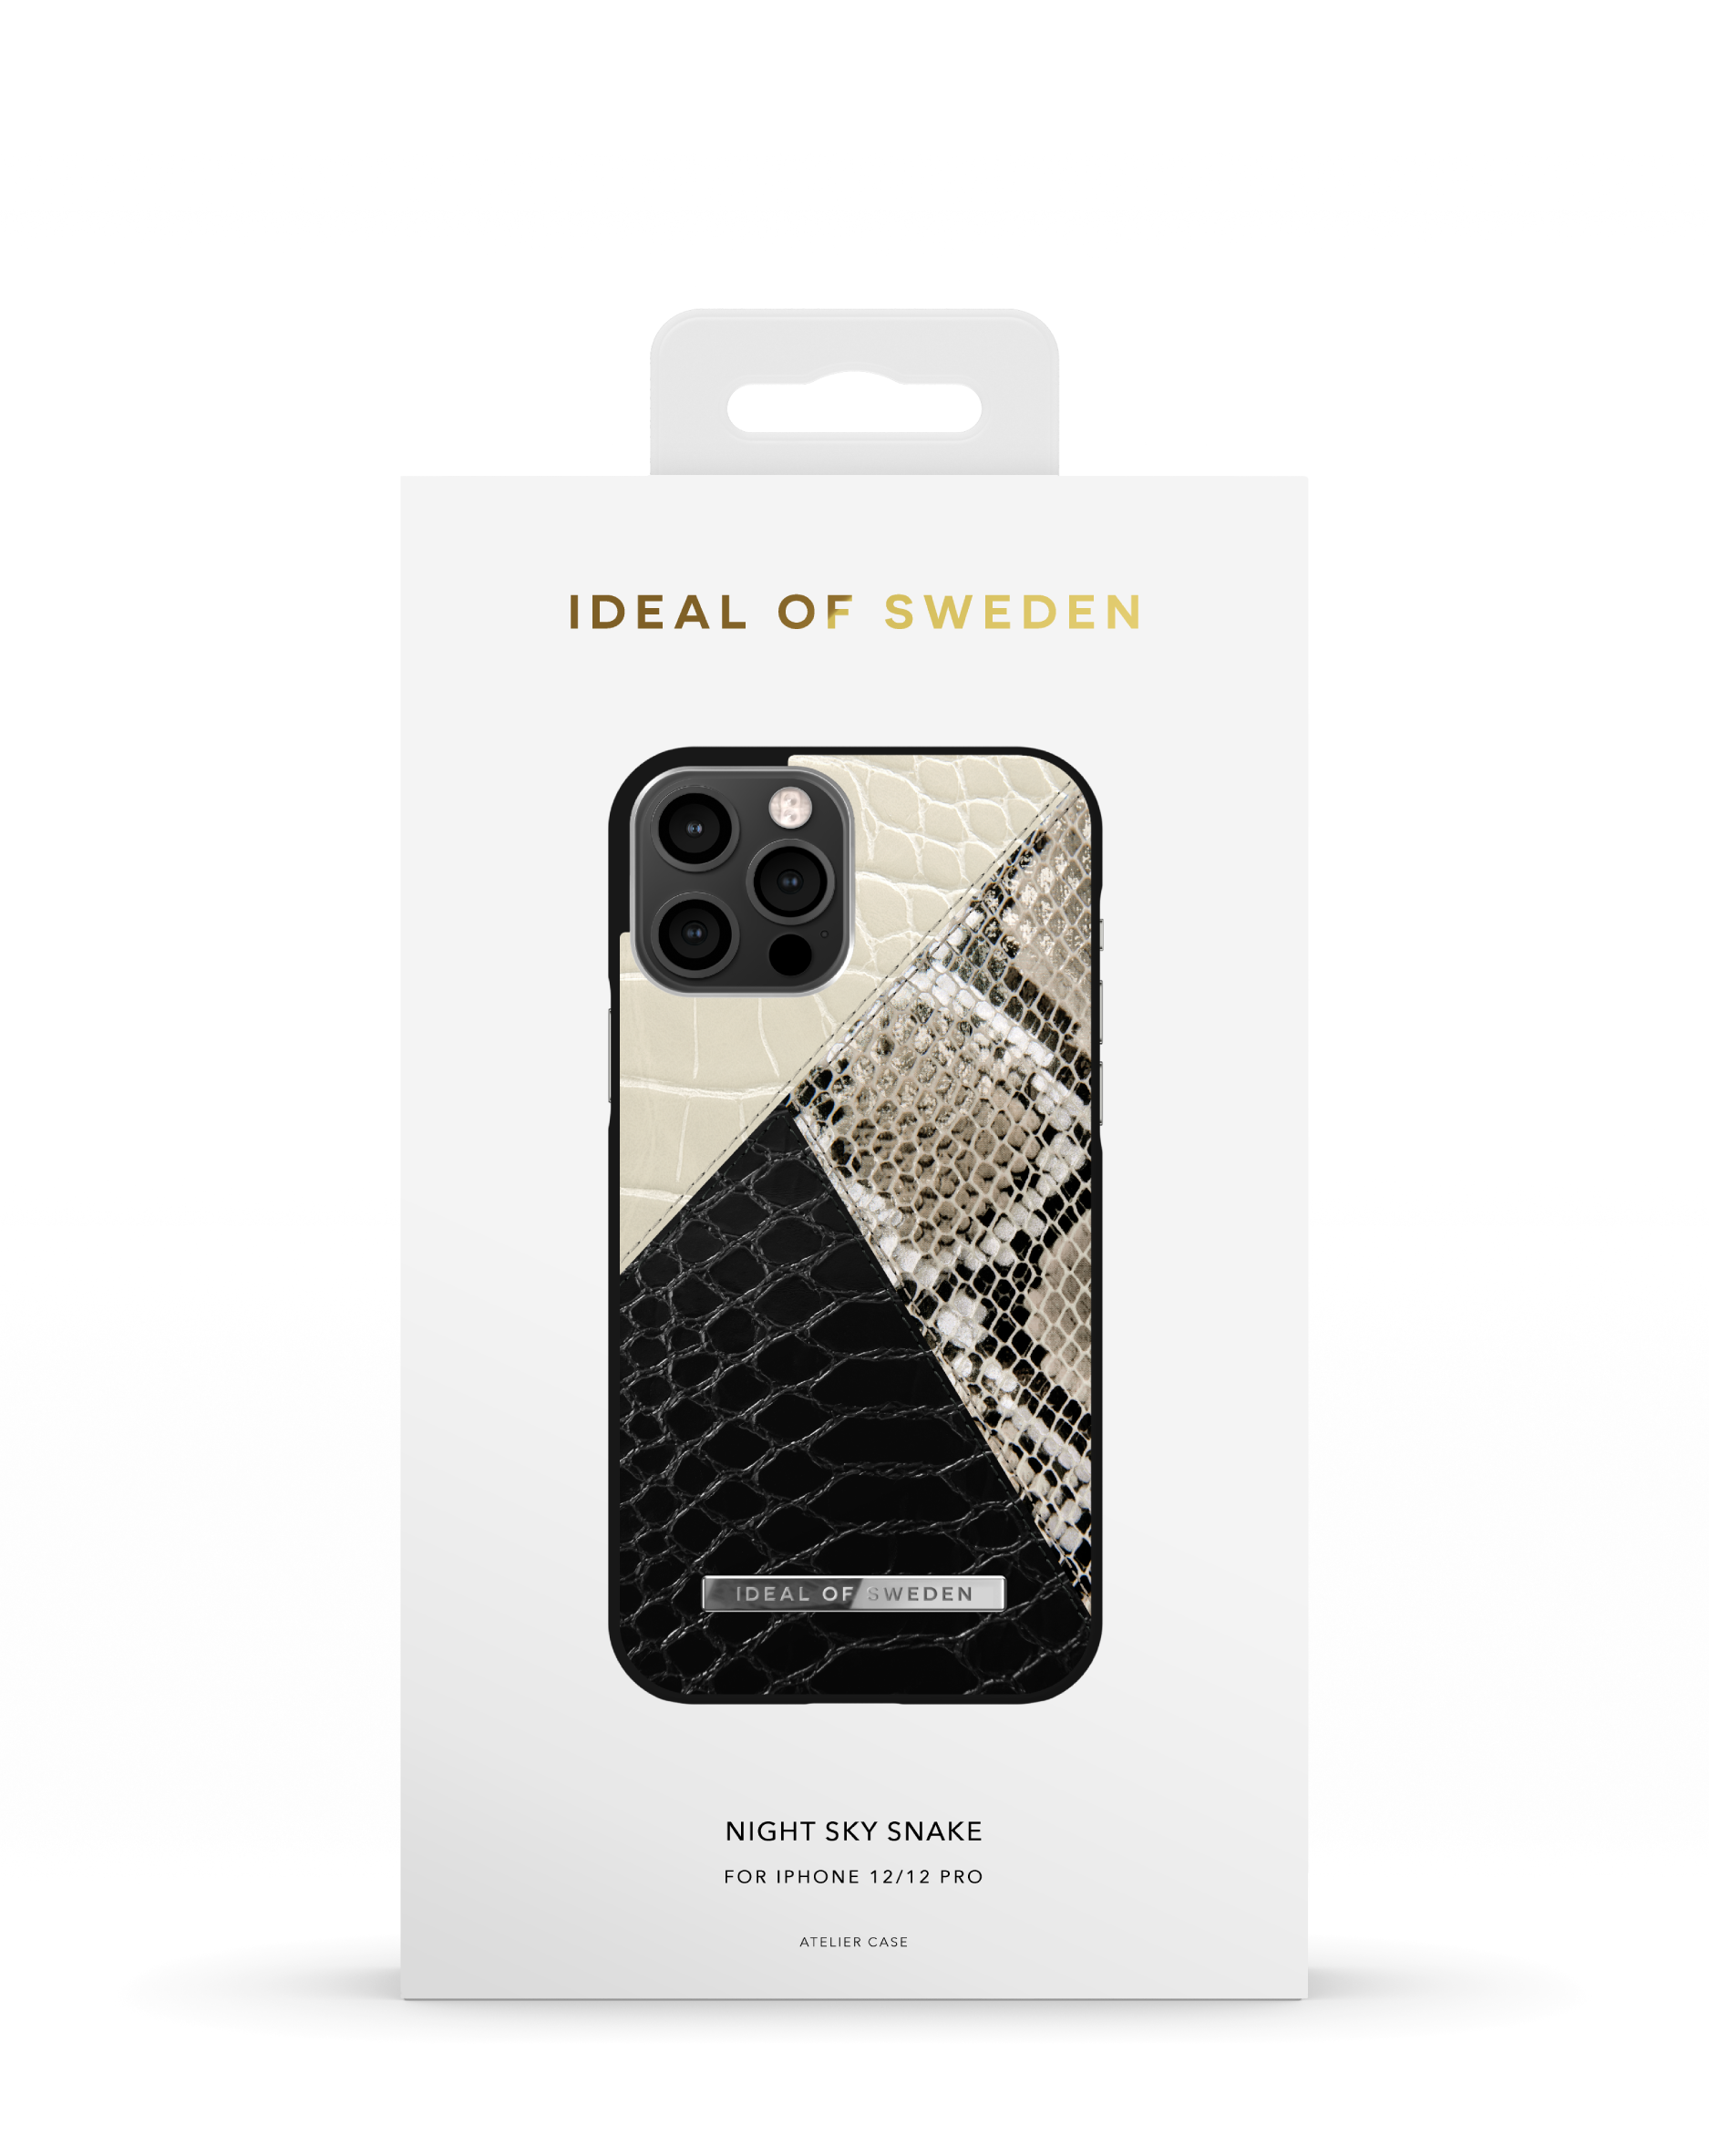 IDEAL OF SWEDEN IDACSS21-I2061-271, Apple Apple 12, 12 Snake Backcover, Pro, Night iPhone Sky Apple, iPhone